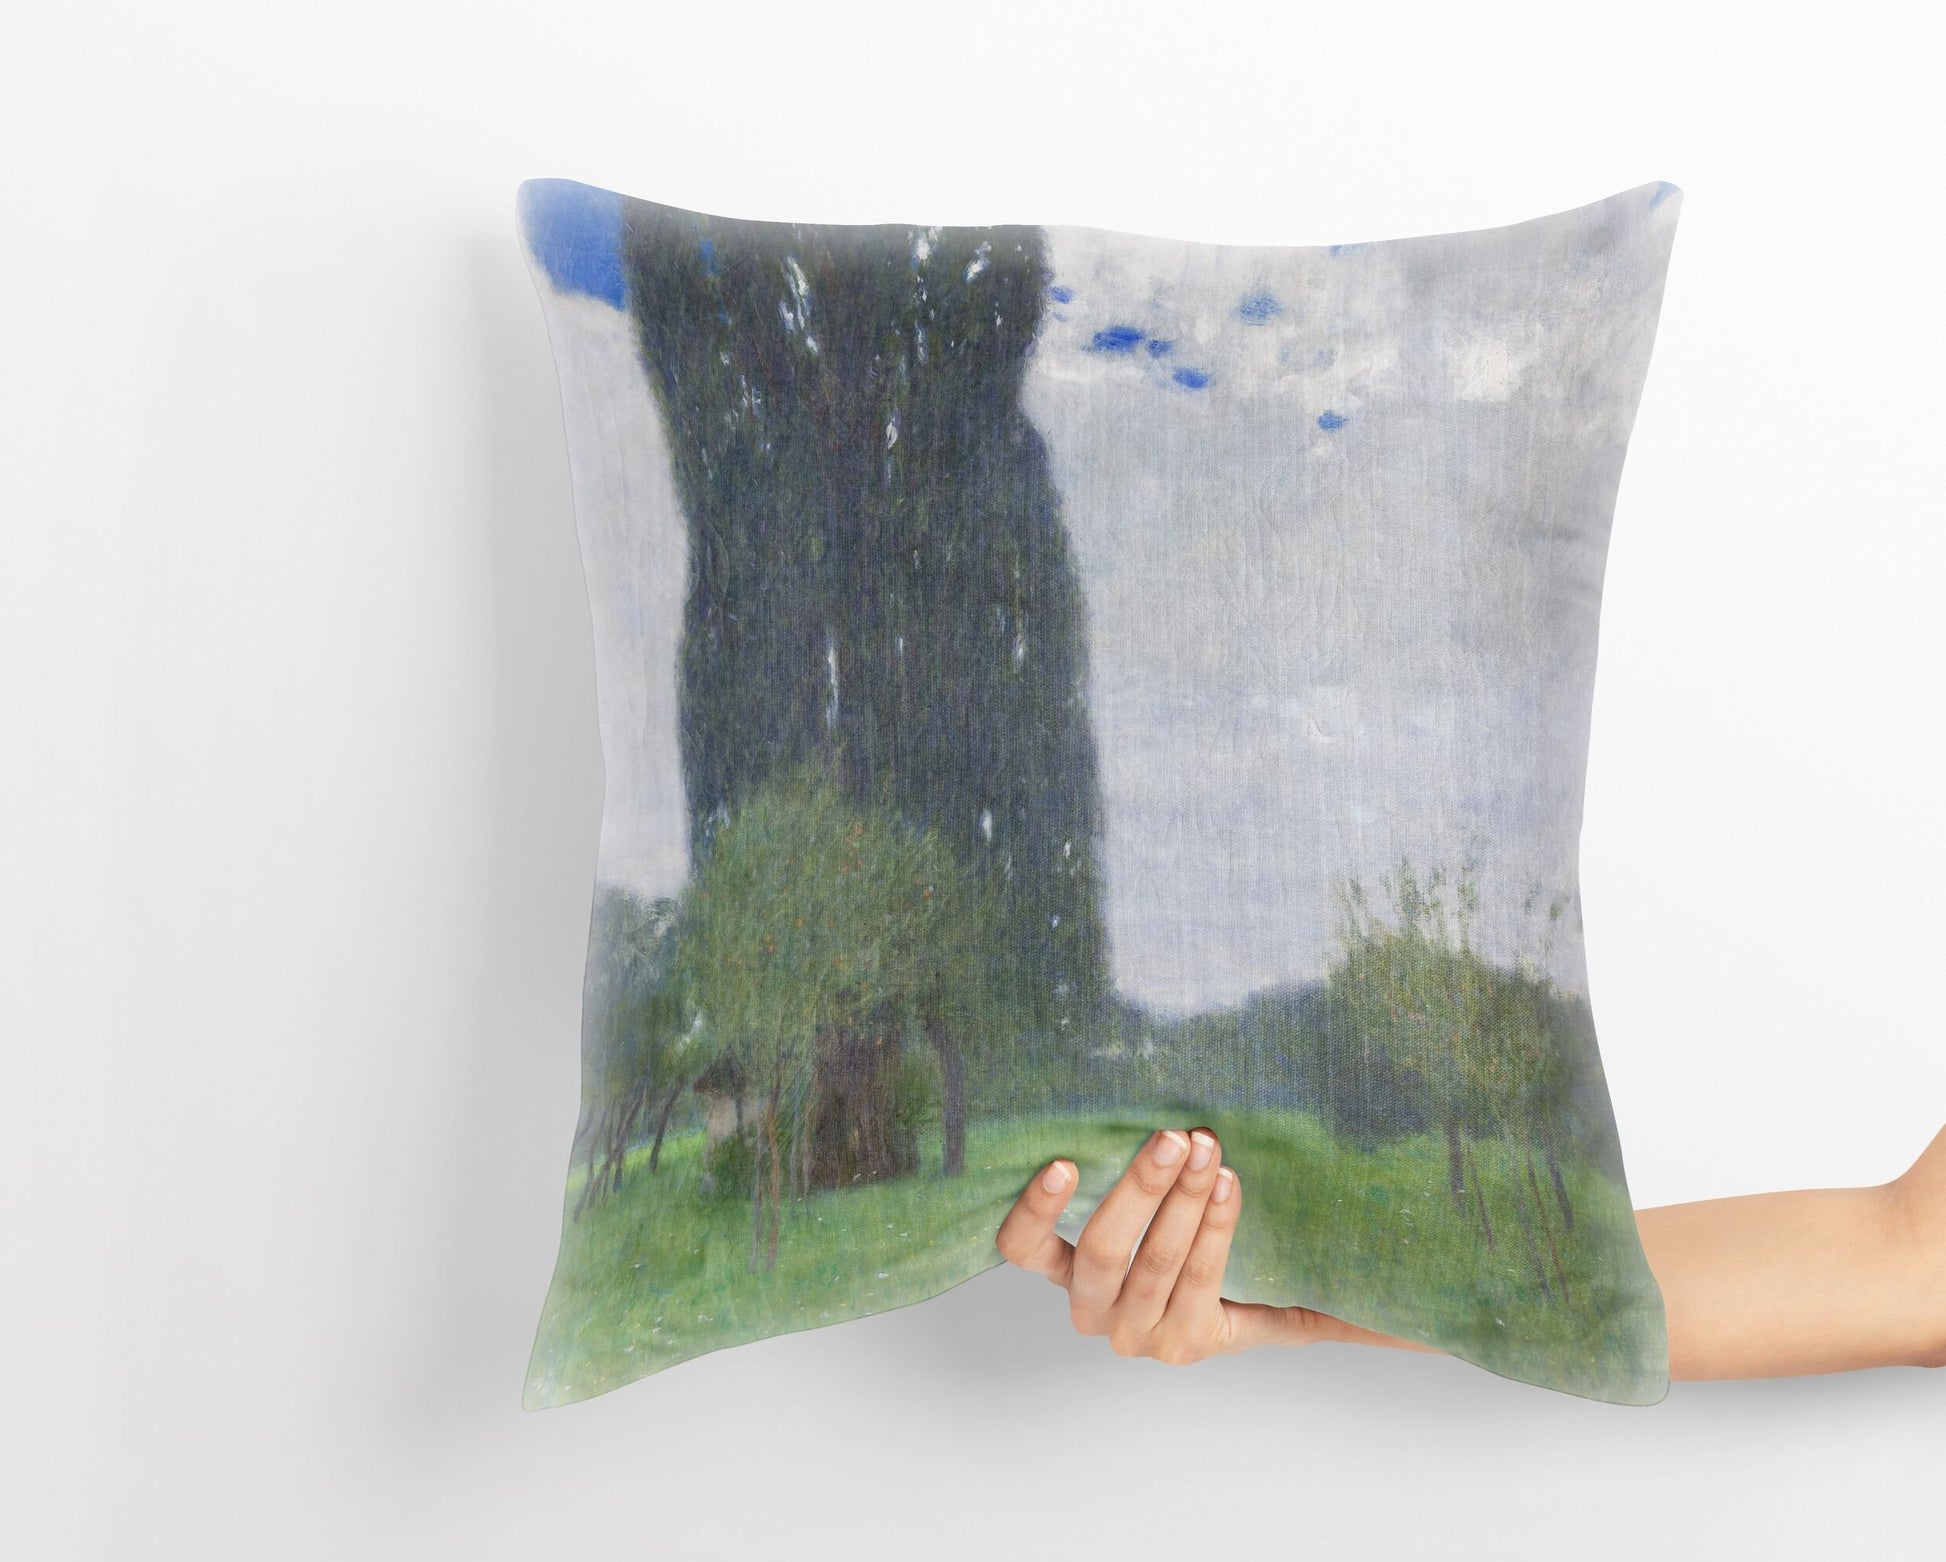 Gustav Klimt Famous Painting The Large Poplar, Tapestry Pillows, Abstract Throw Pillow Cover, Designer Pillow, Green Pillow Cases